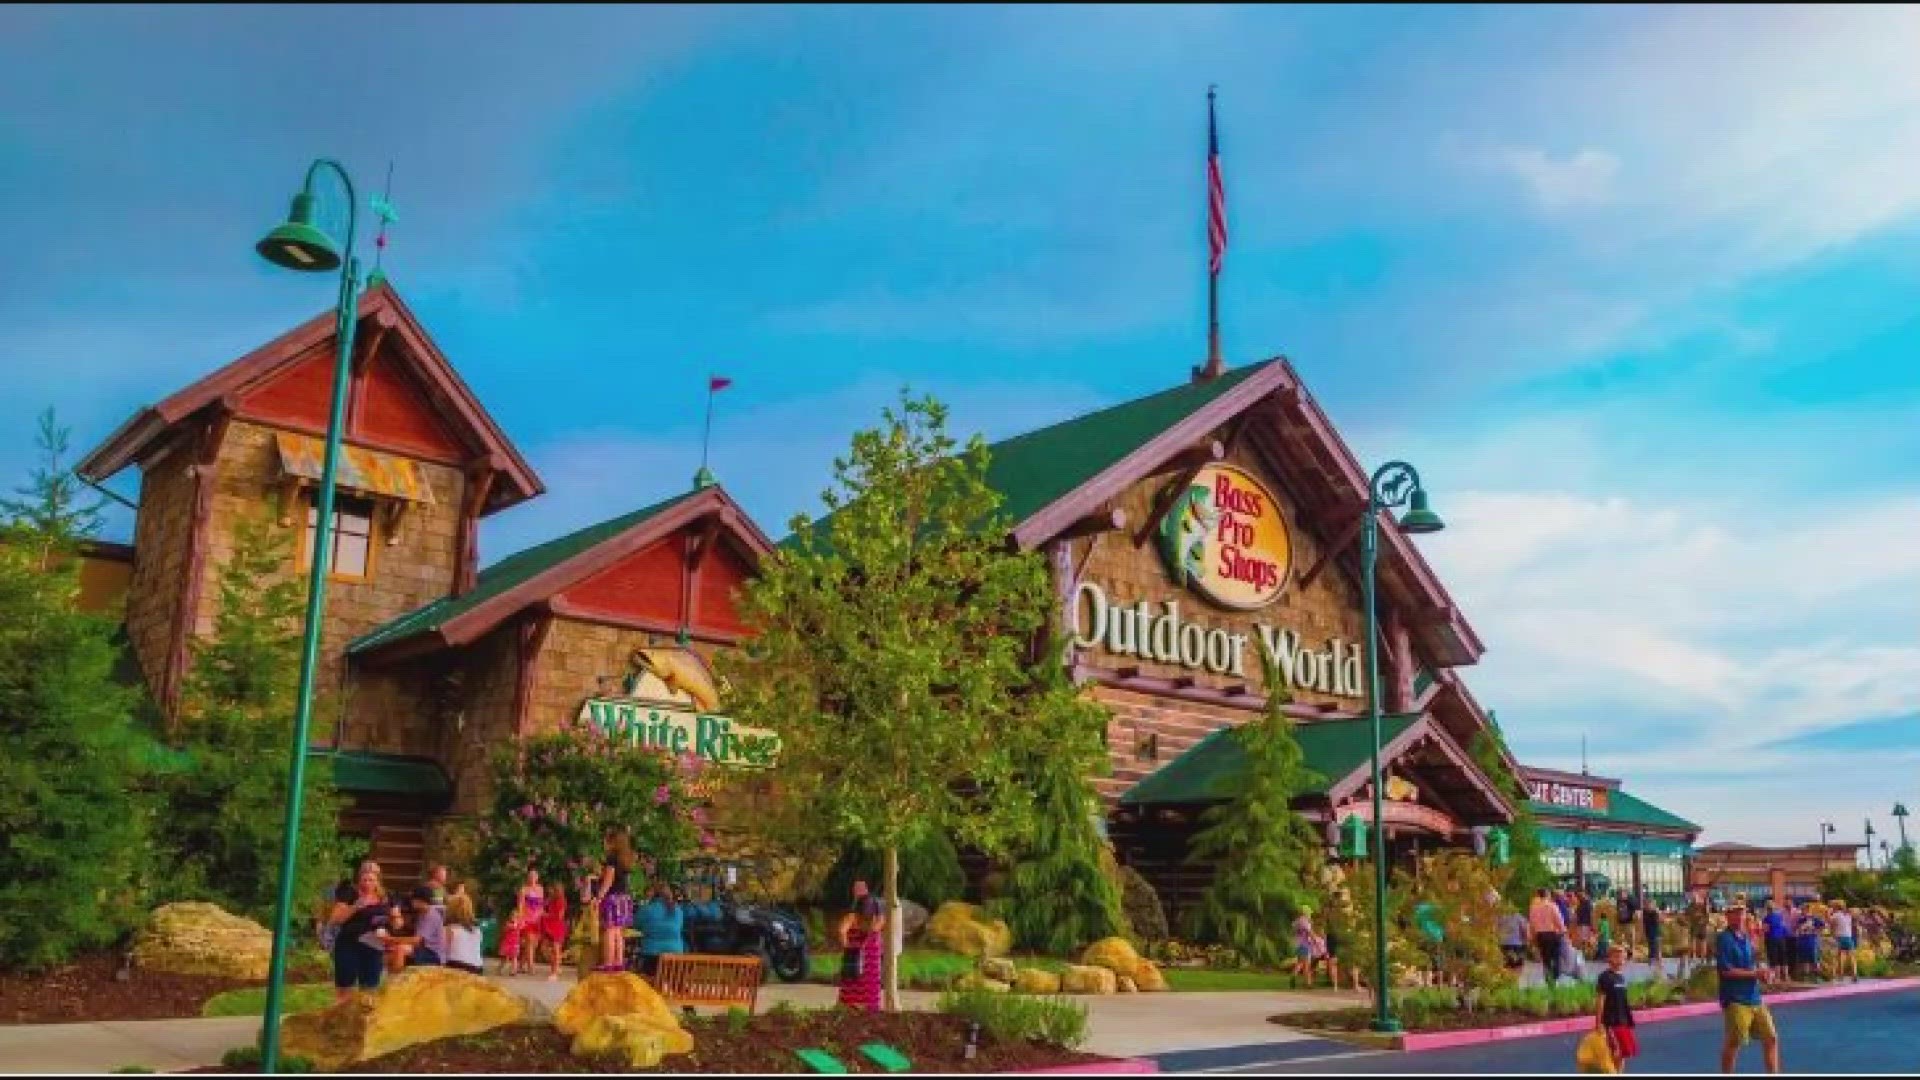 The agreement paves the way for Bass Pro Shops coming to Midland.